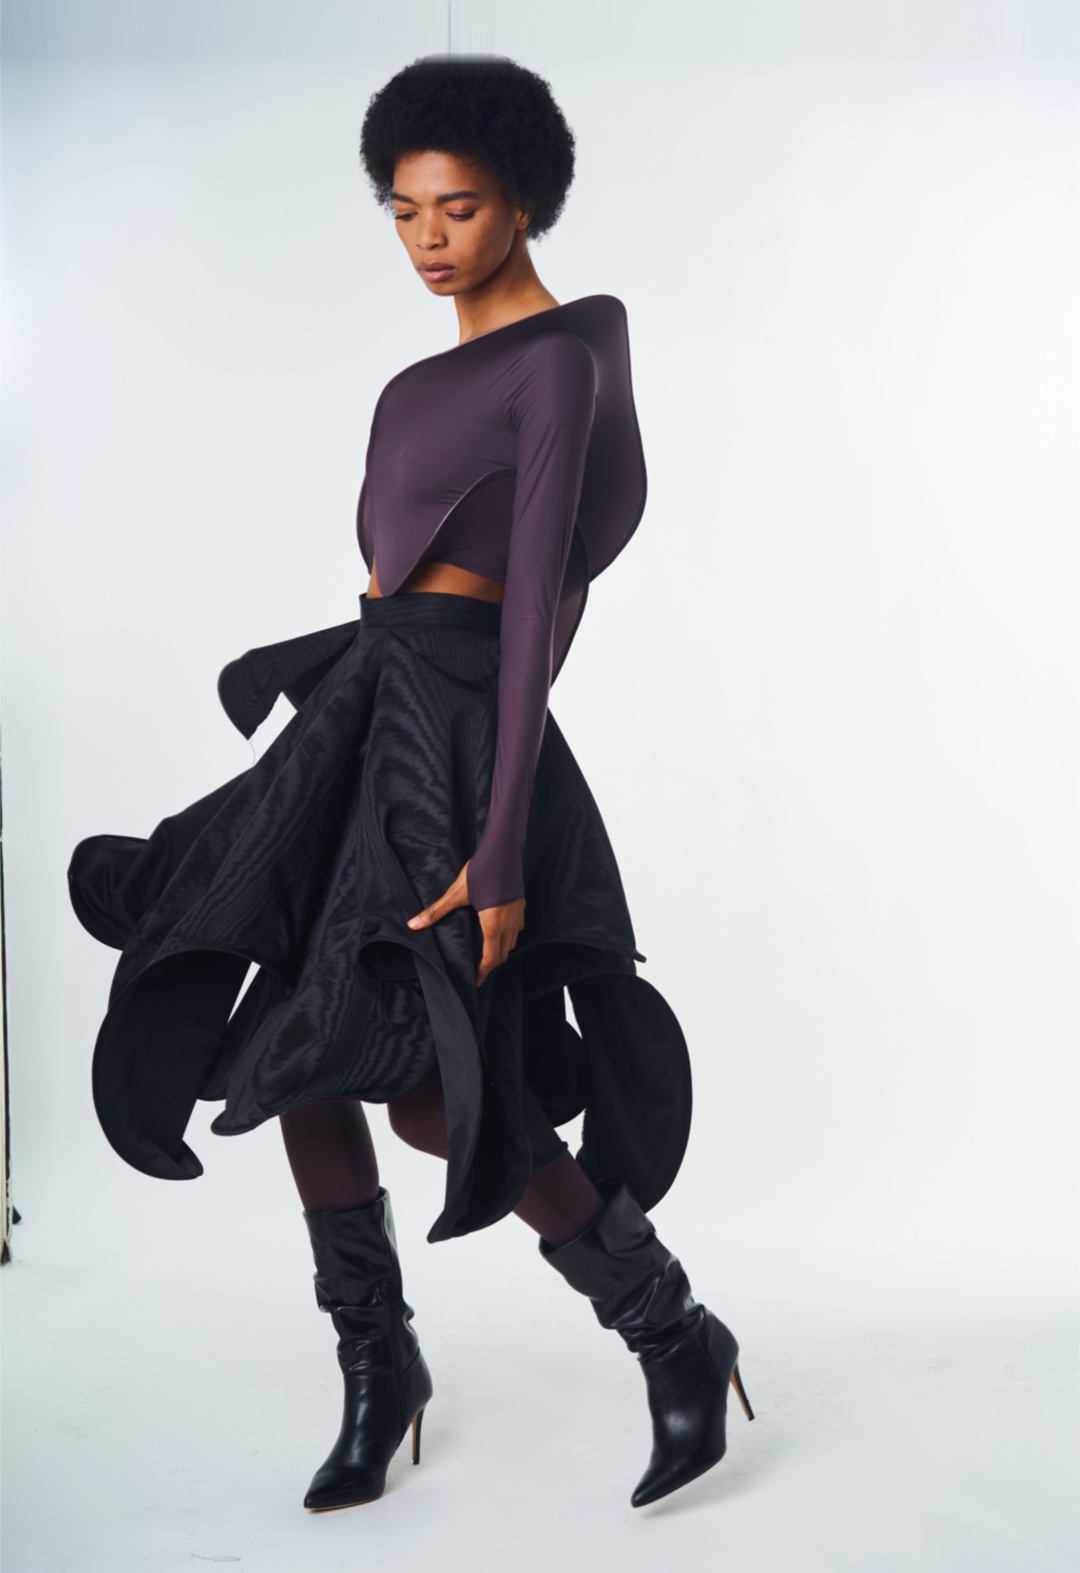 A model presents the top and skirt in a three-quarter view.